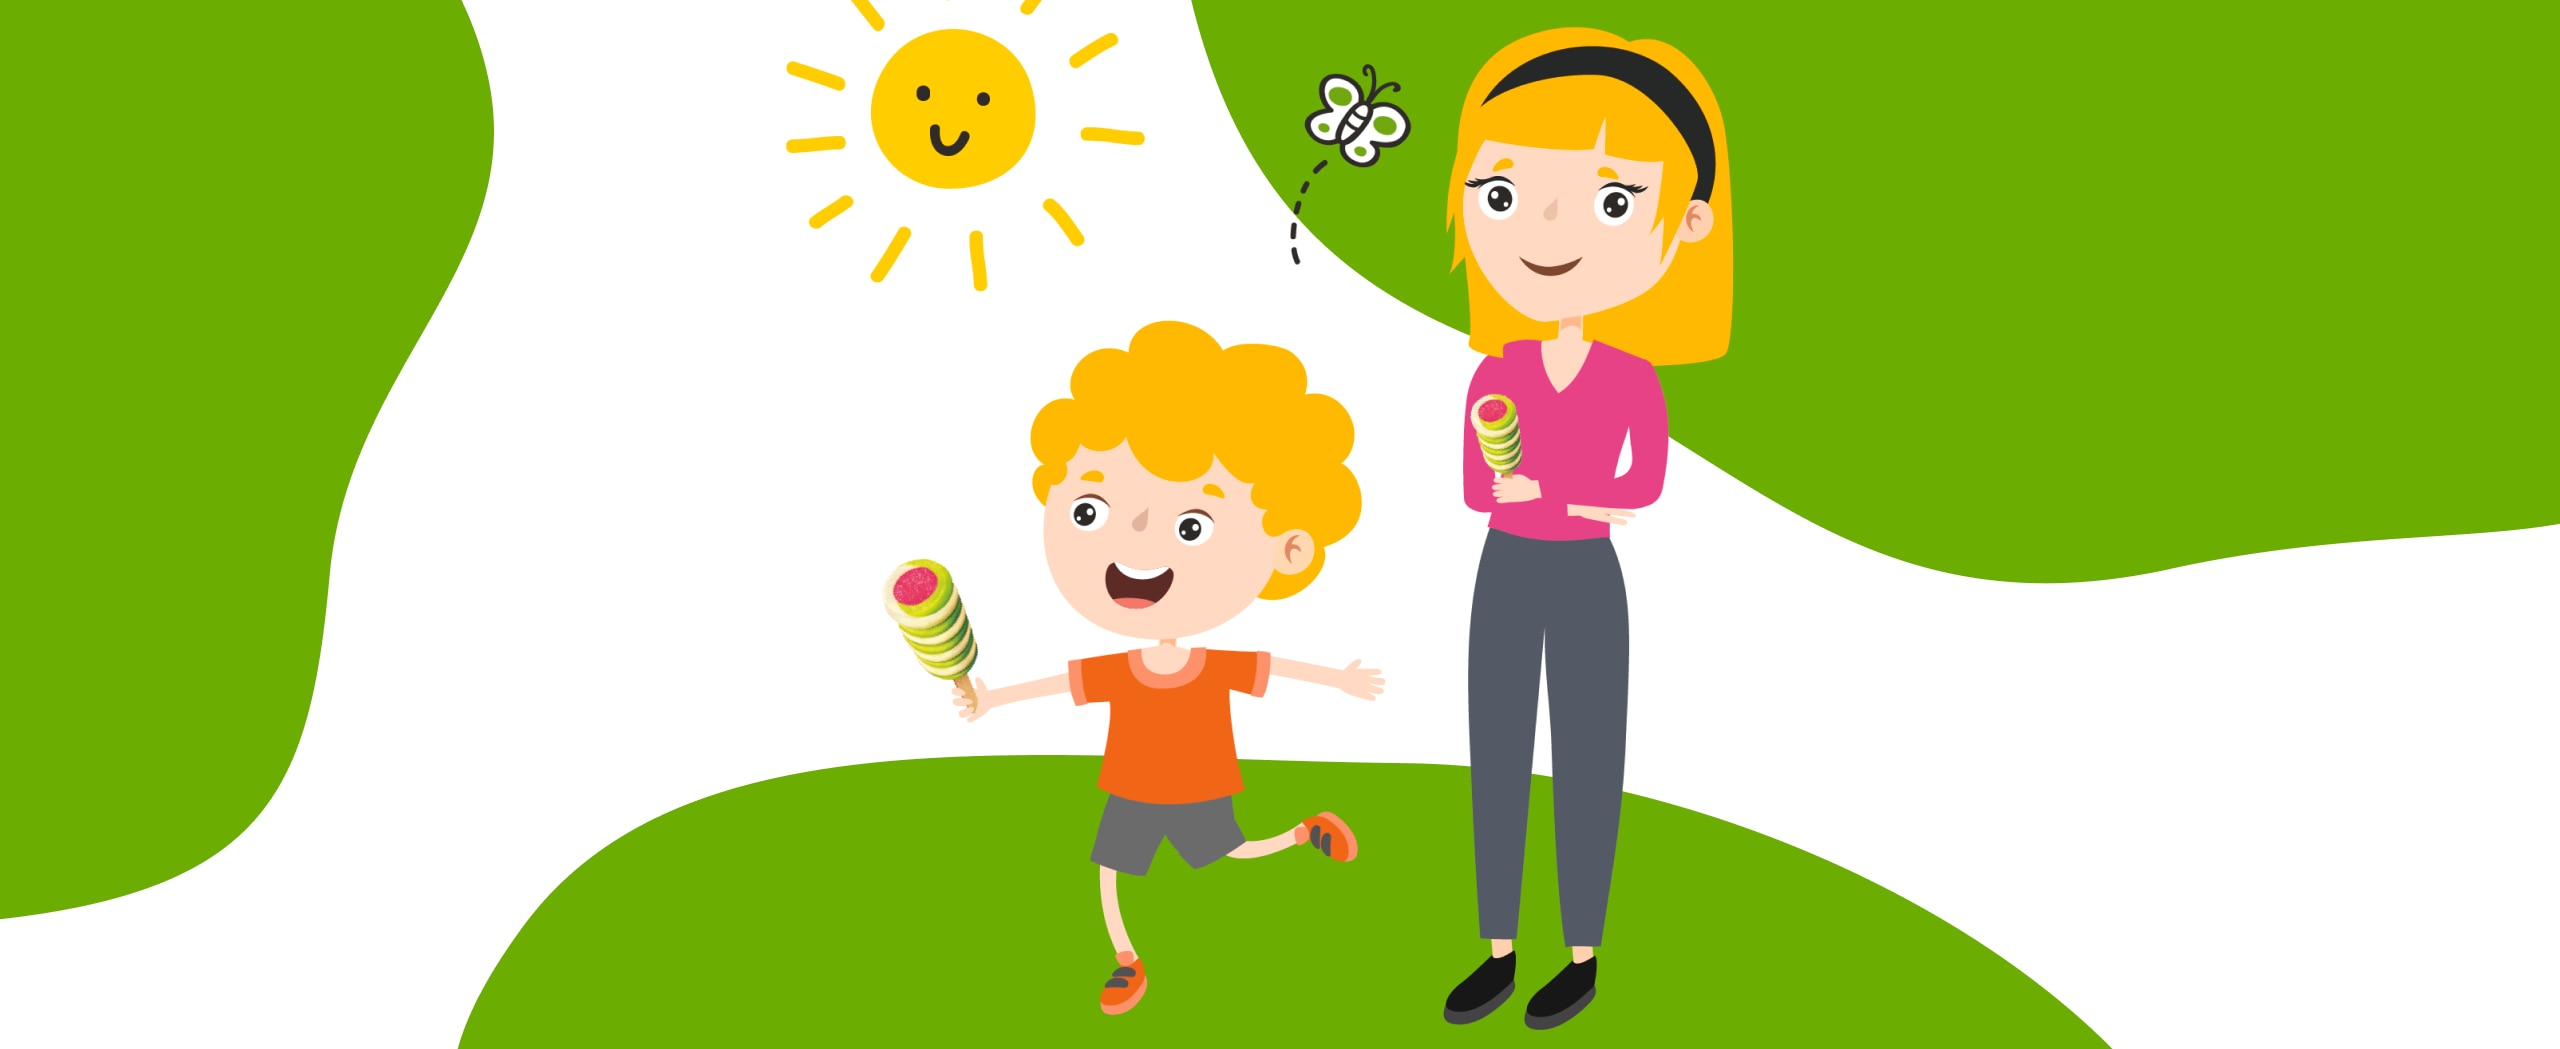 Cartoon drawing of mother with kid eating ice cream 